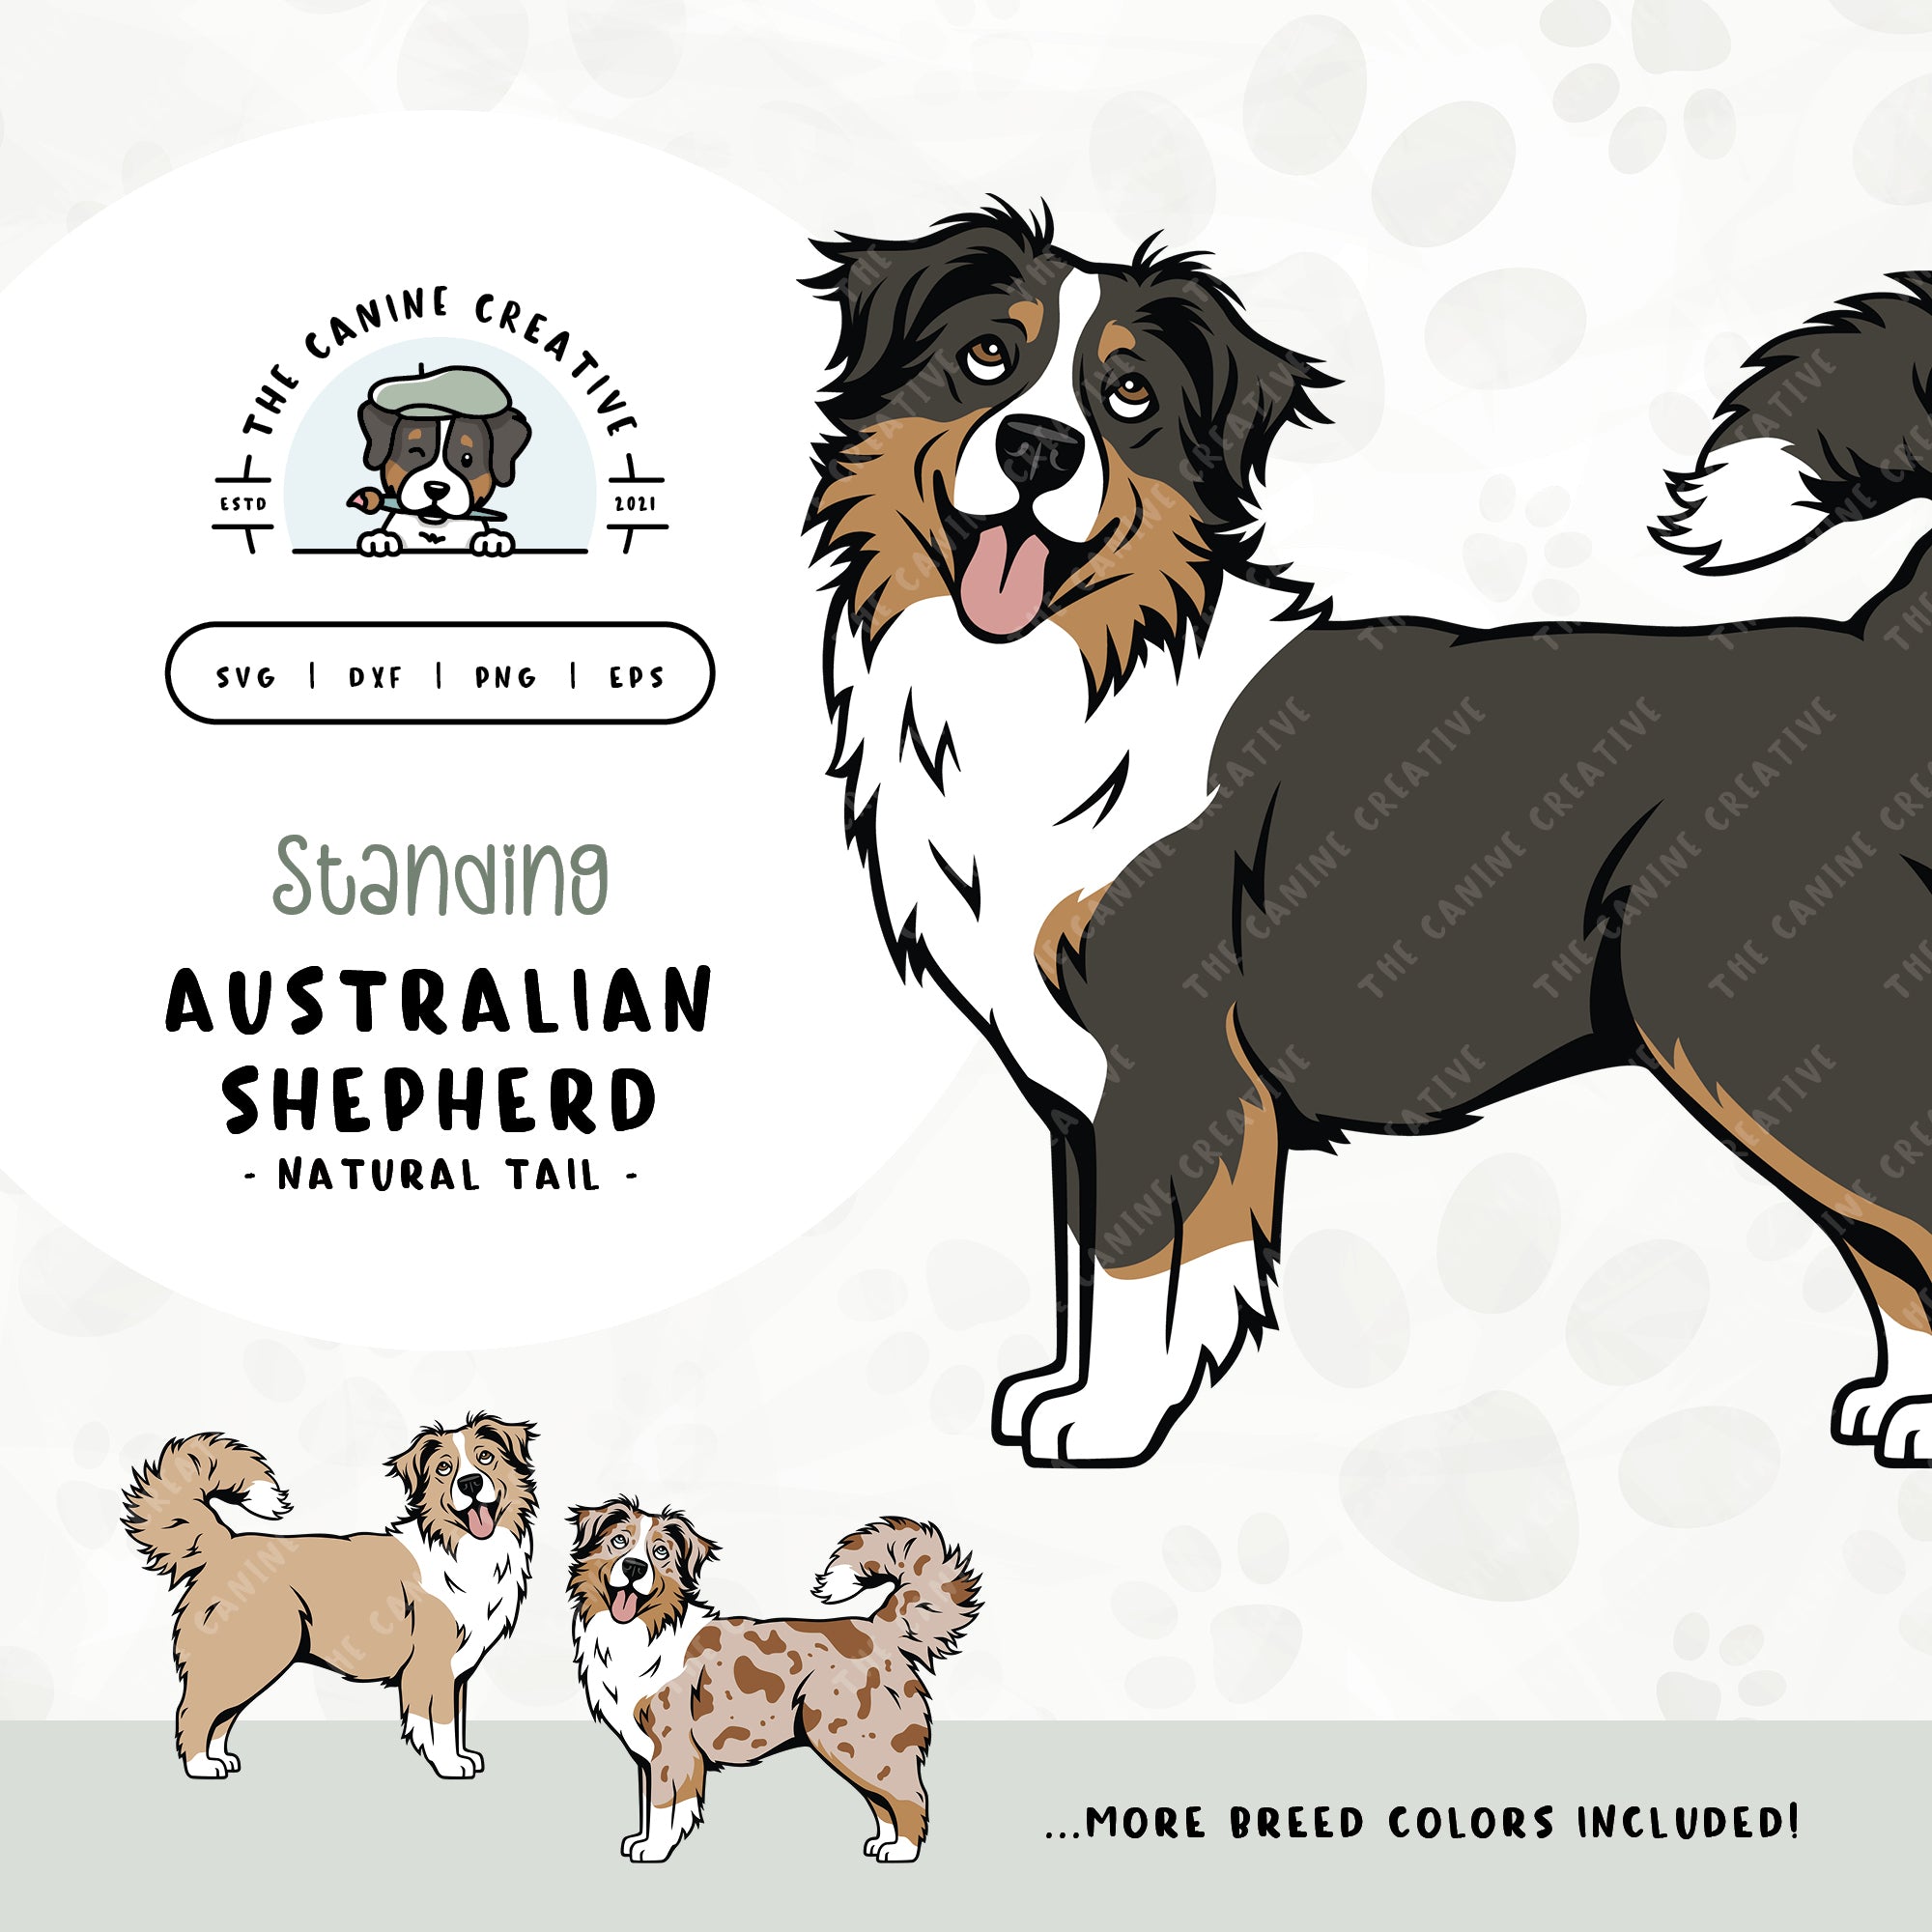 This standing dog design features an Australian Shepherd with a long tail. File formats include: SVG, DXF, PNG, and EPS.